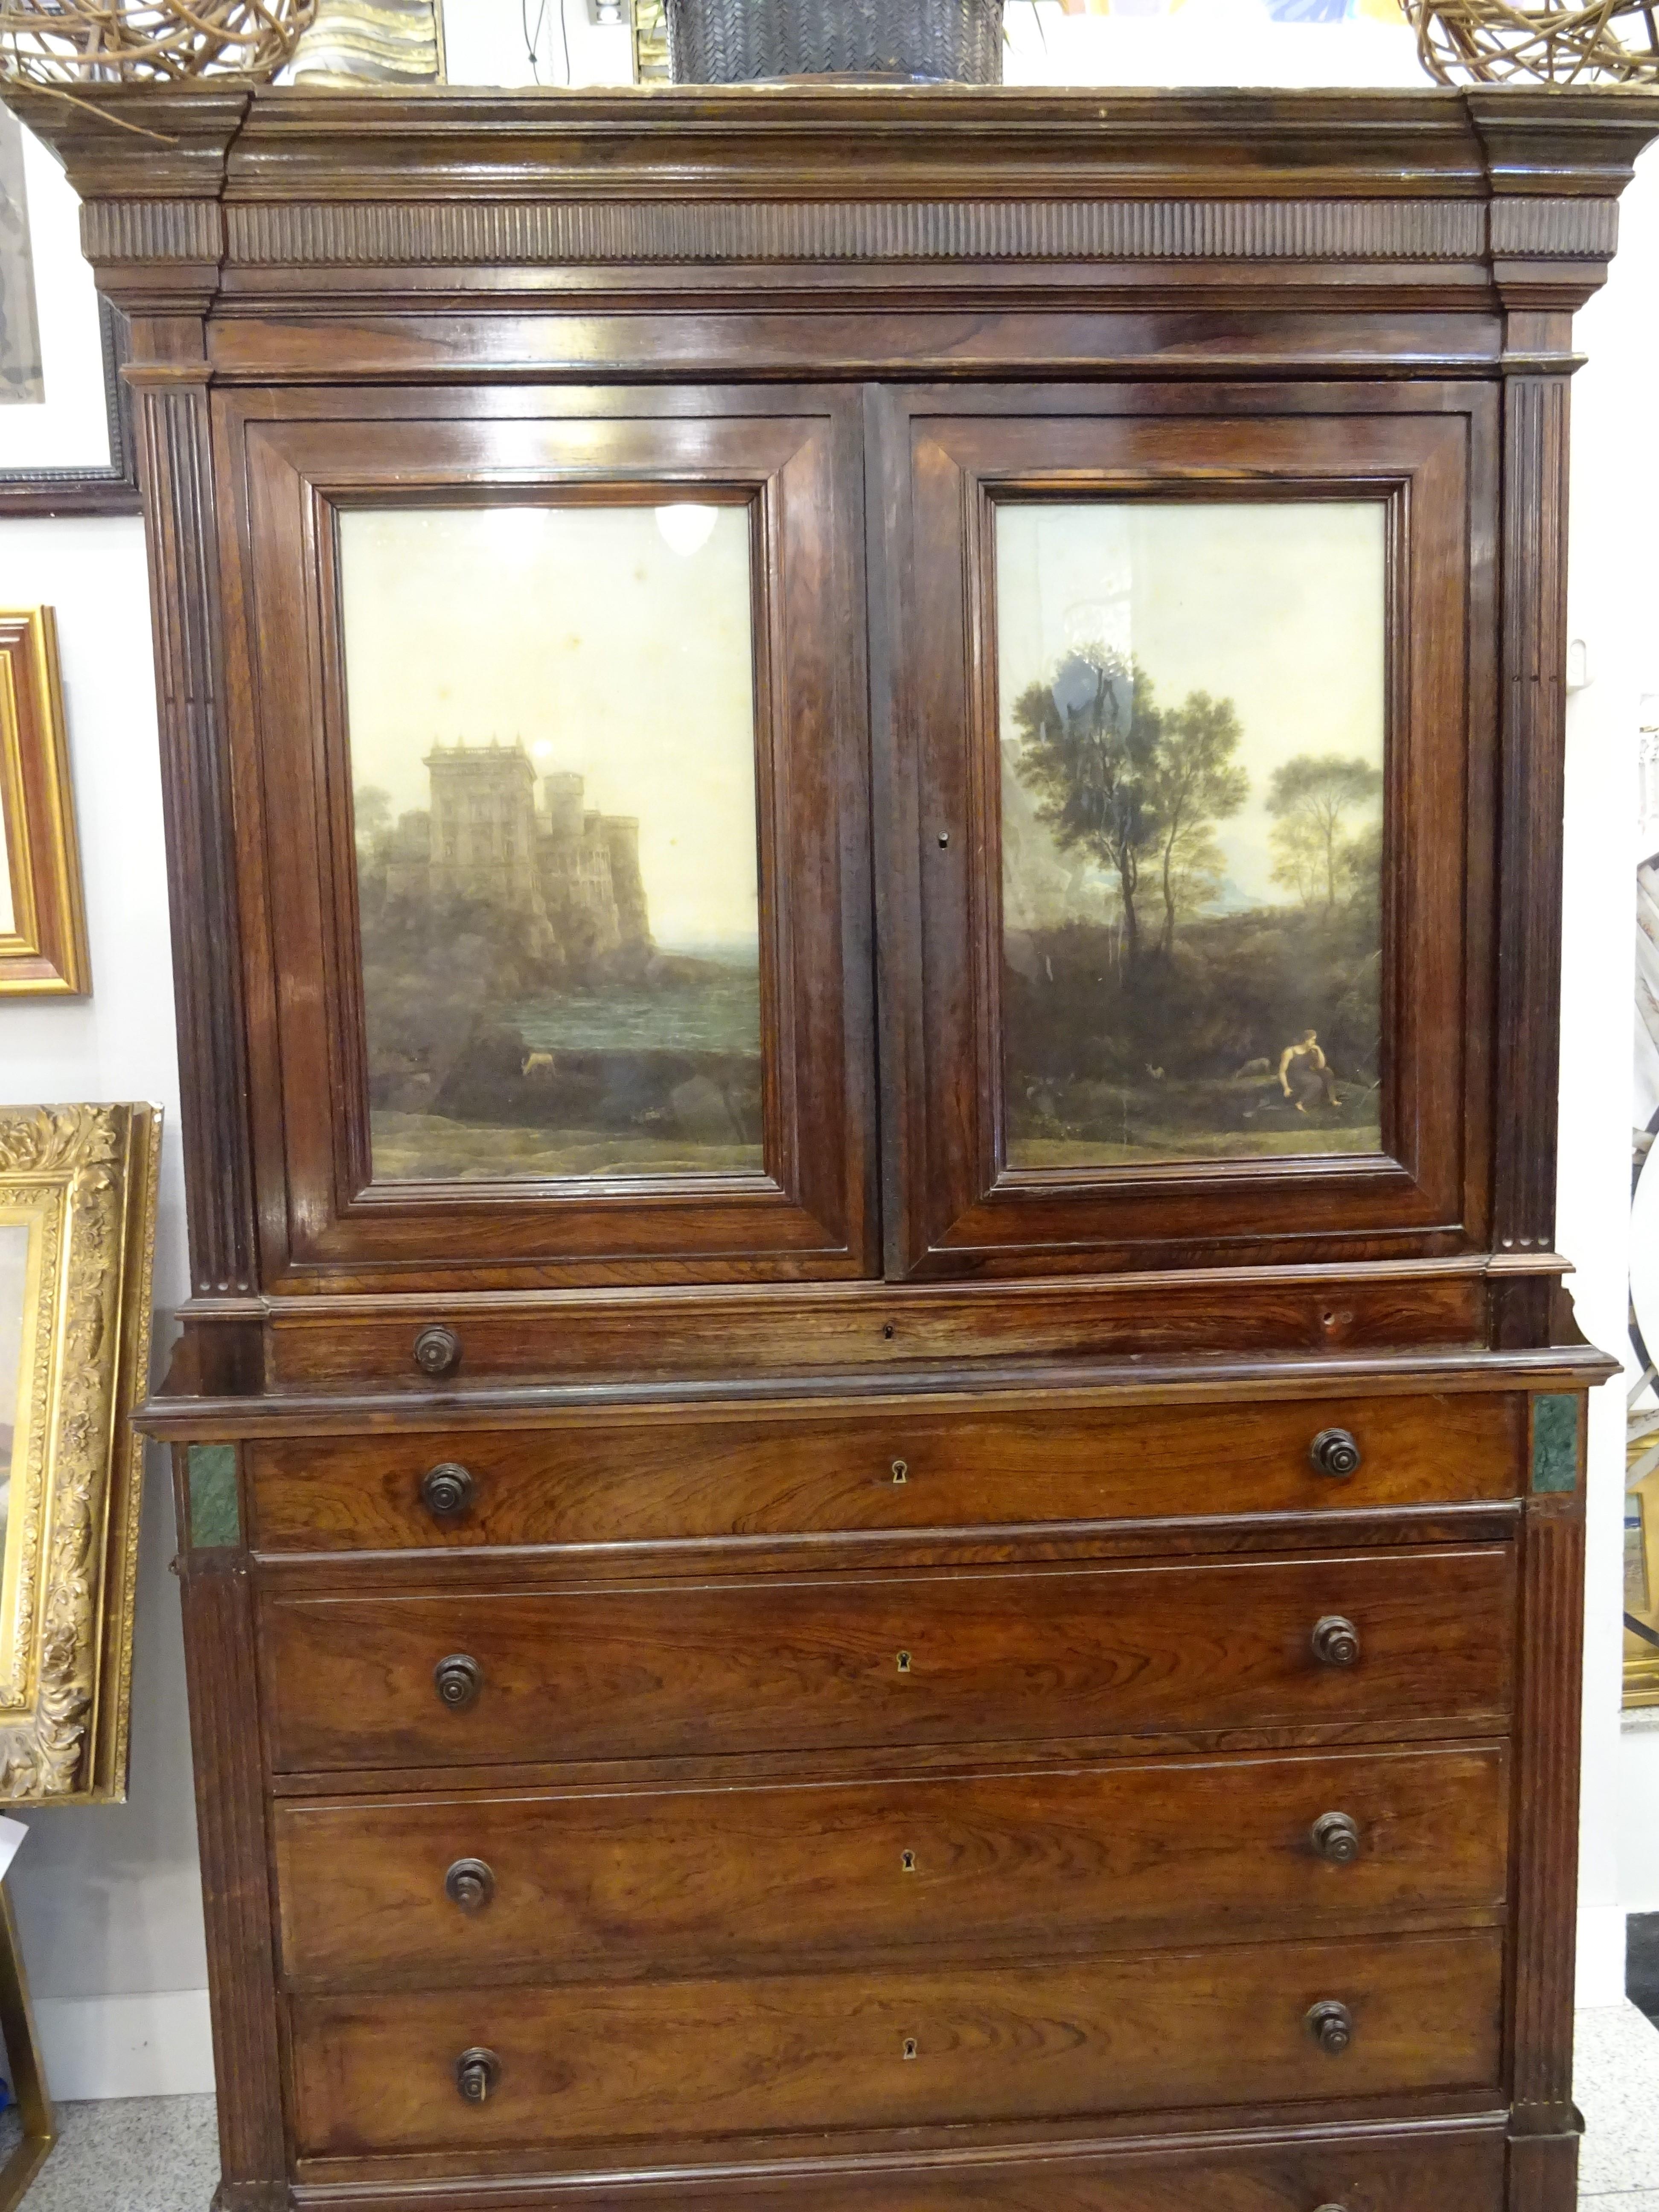 Stunning English Georgian tropical wood cupboard or linen presses, 19th century. Top doors in blown glass with gorgous Italian offsets printing, at the bottom there is a first drawer that is made table, and five more drawers. On the sides some green